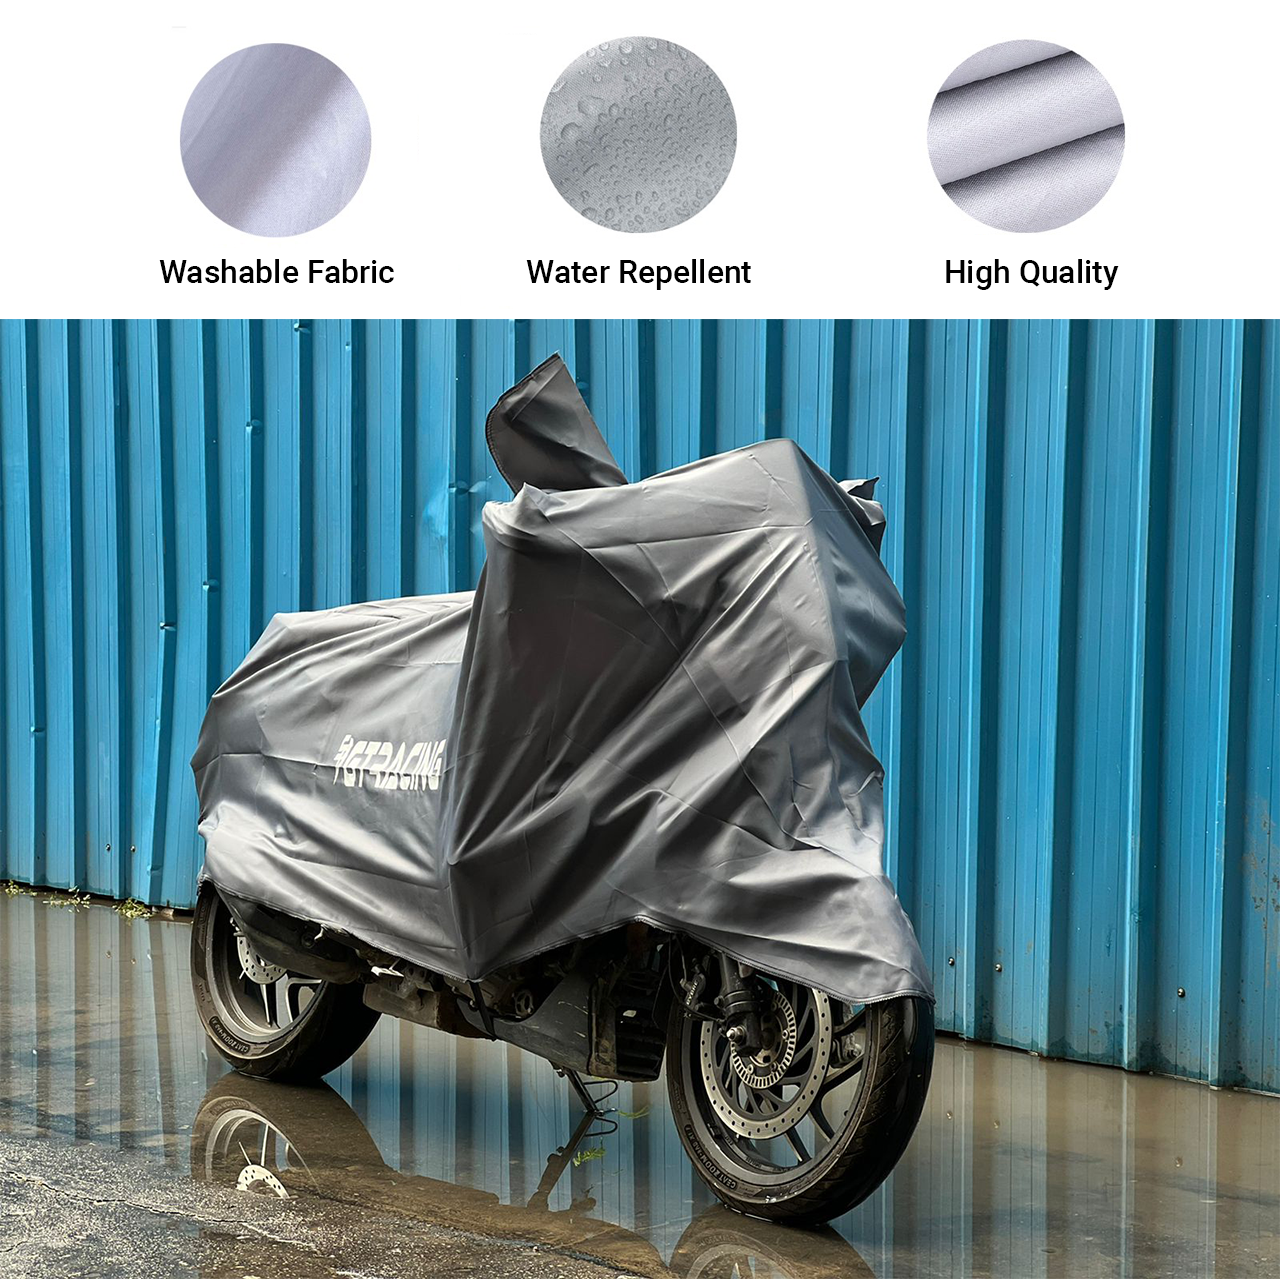 Steelbird Bike Cover GT Racing UV Protection Water-Resistant & Dustproof (Silver Matty), Bike Body Cover With Carry Bag (All Scooter Activa Electric Scooty Size)